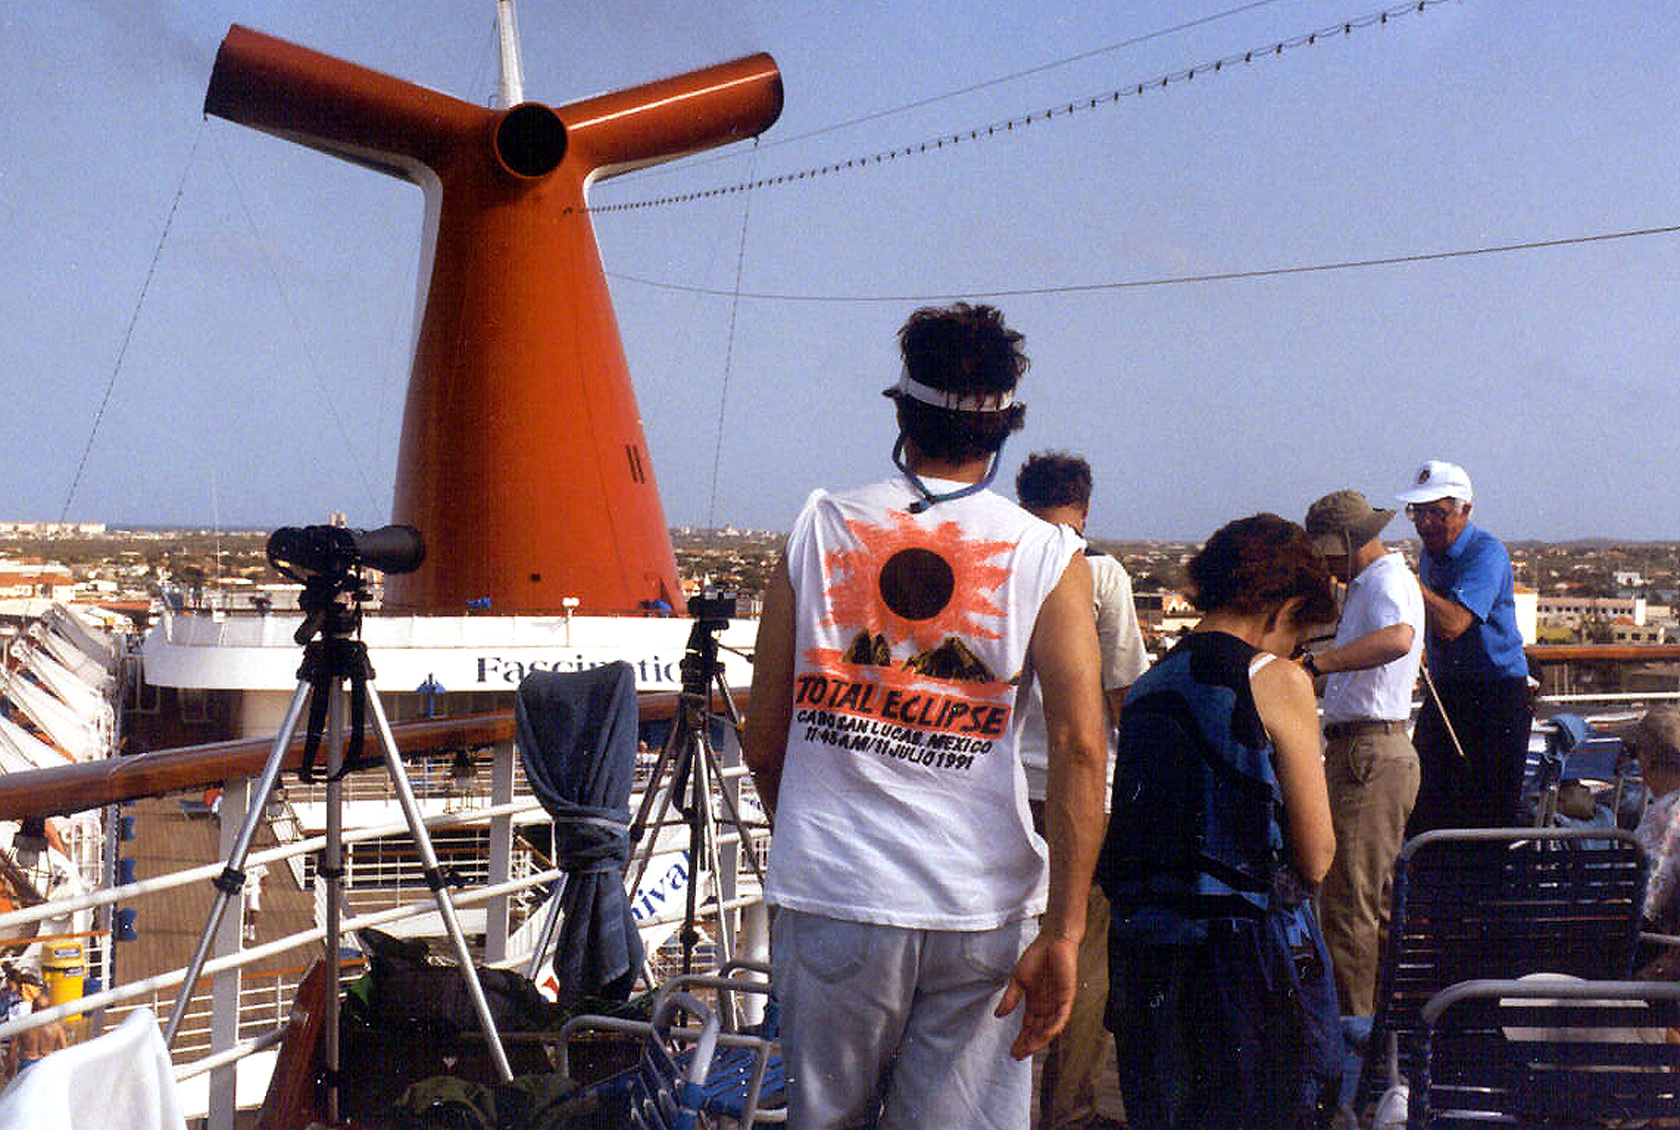 Eclipse 1998 - A51 - Setting up